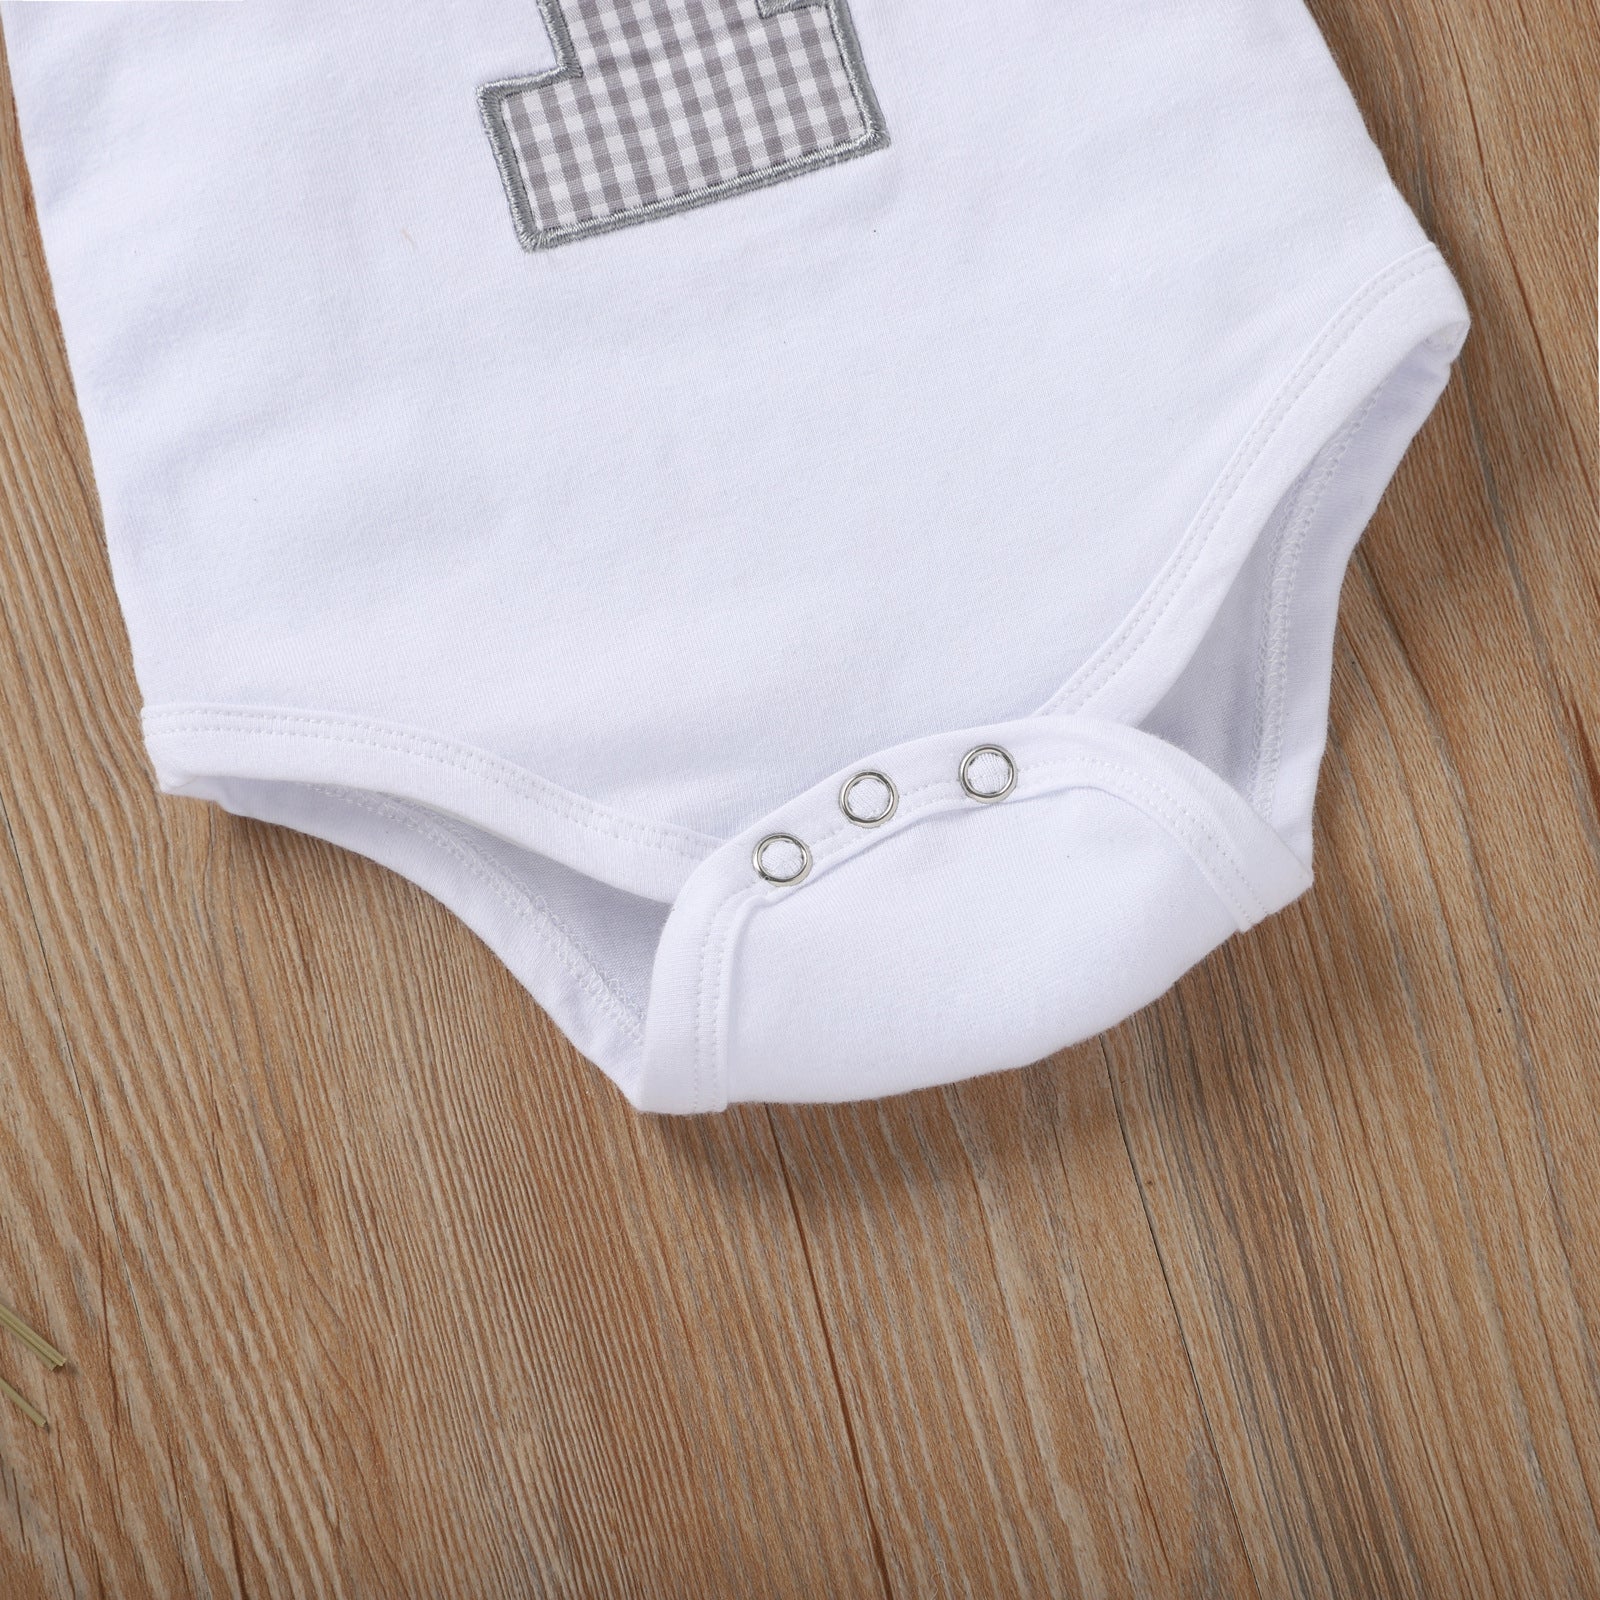 Newborn Two Piece Suit Short Sleeve Set – Affordable-buy